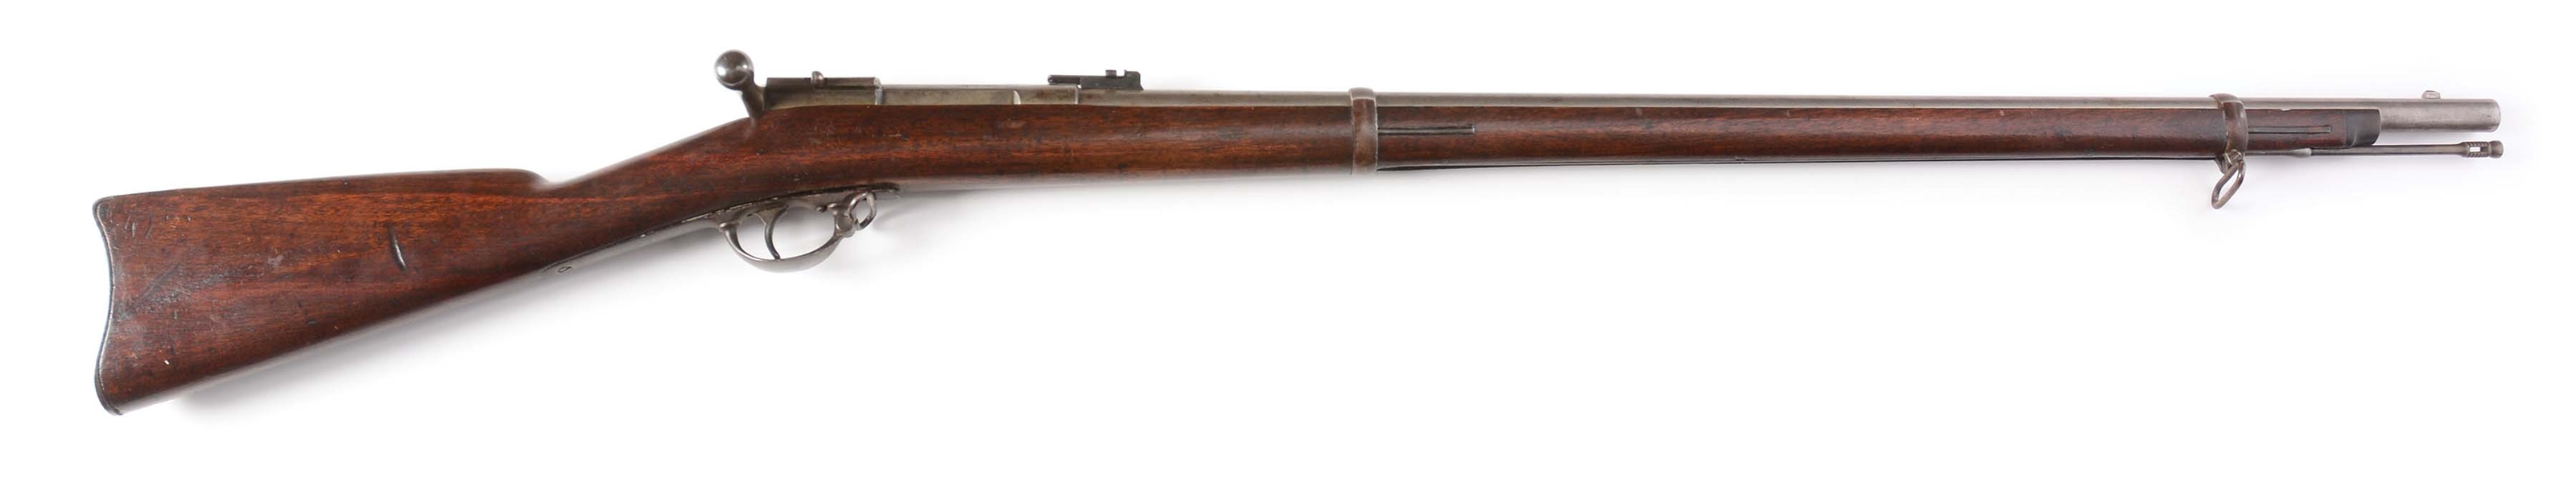 (A) US SPRINGFIELD MODEL 1871 WARD BURTON RIFLE IDENTIFIED TO MARSHAL E.L. TISDALE.